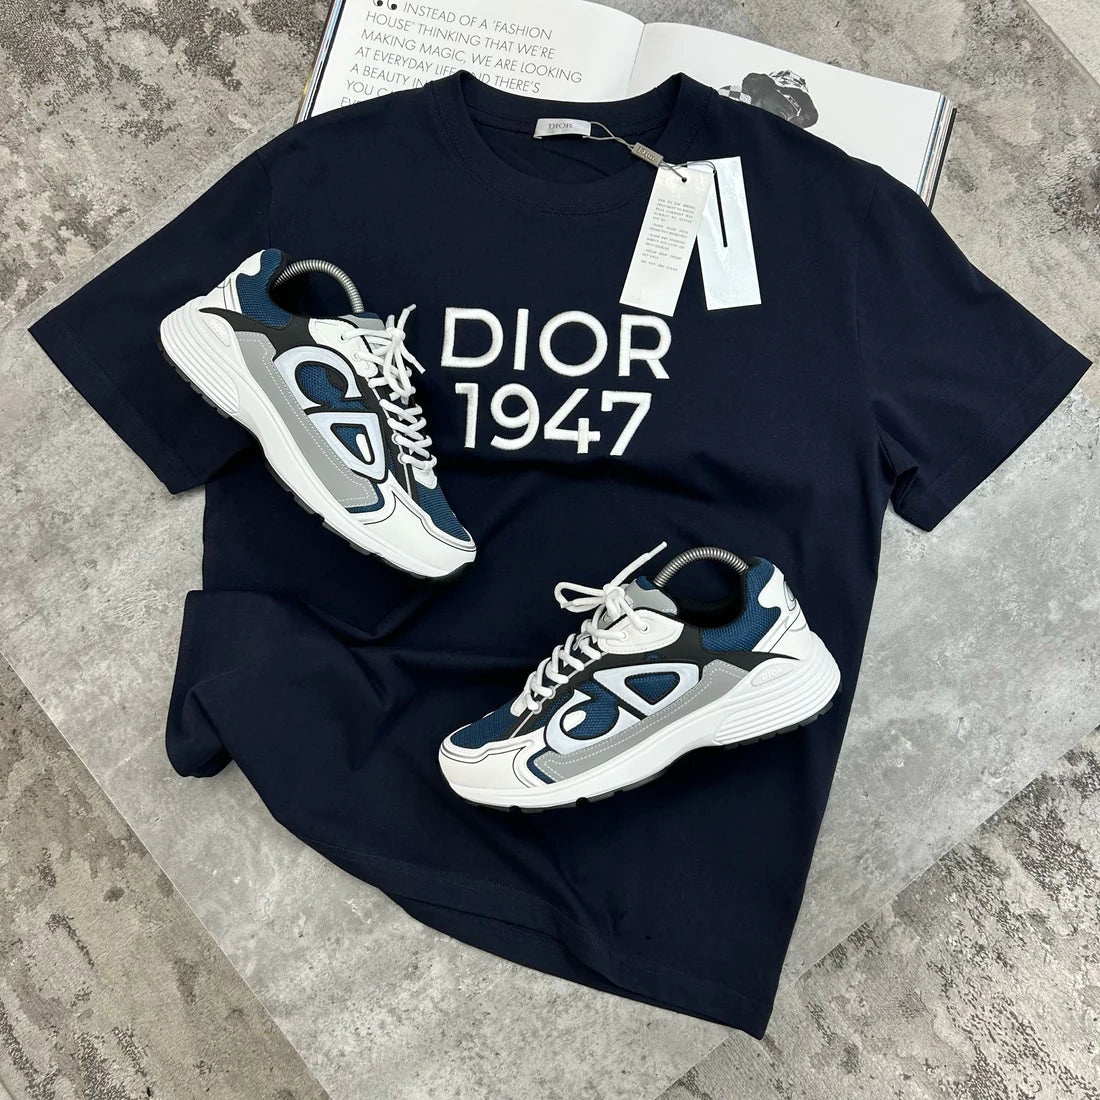 Dior Tshirts (click for latest available Tshirts)